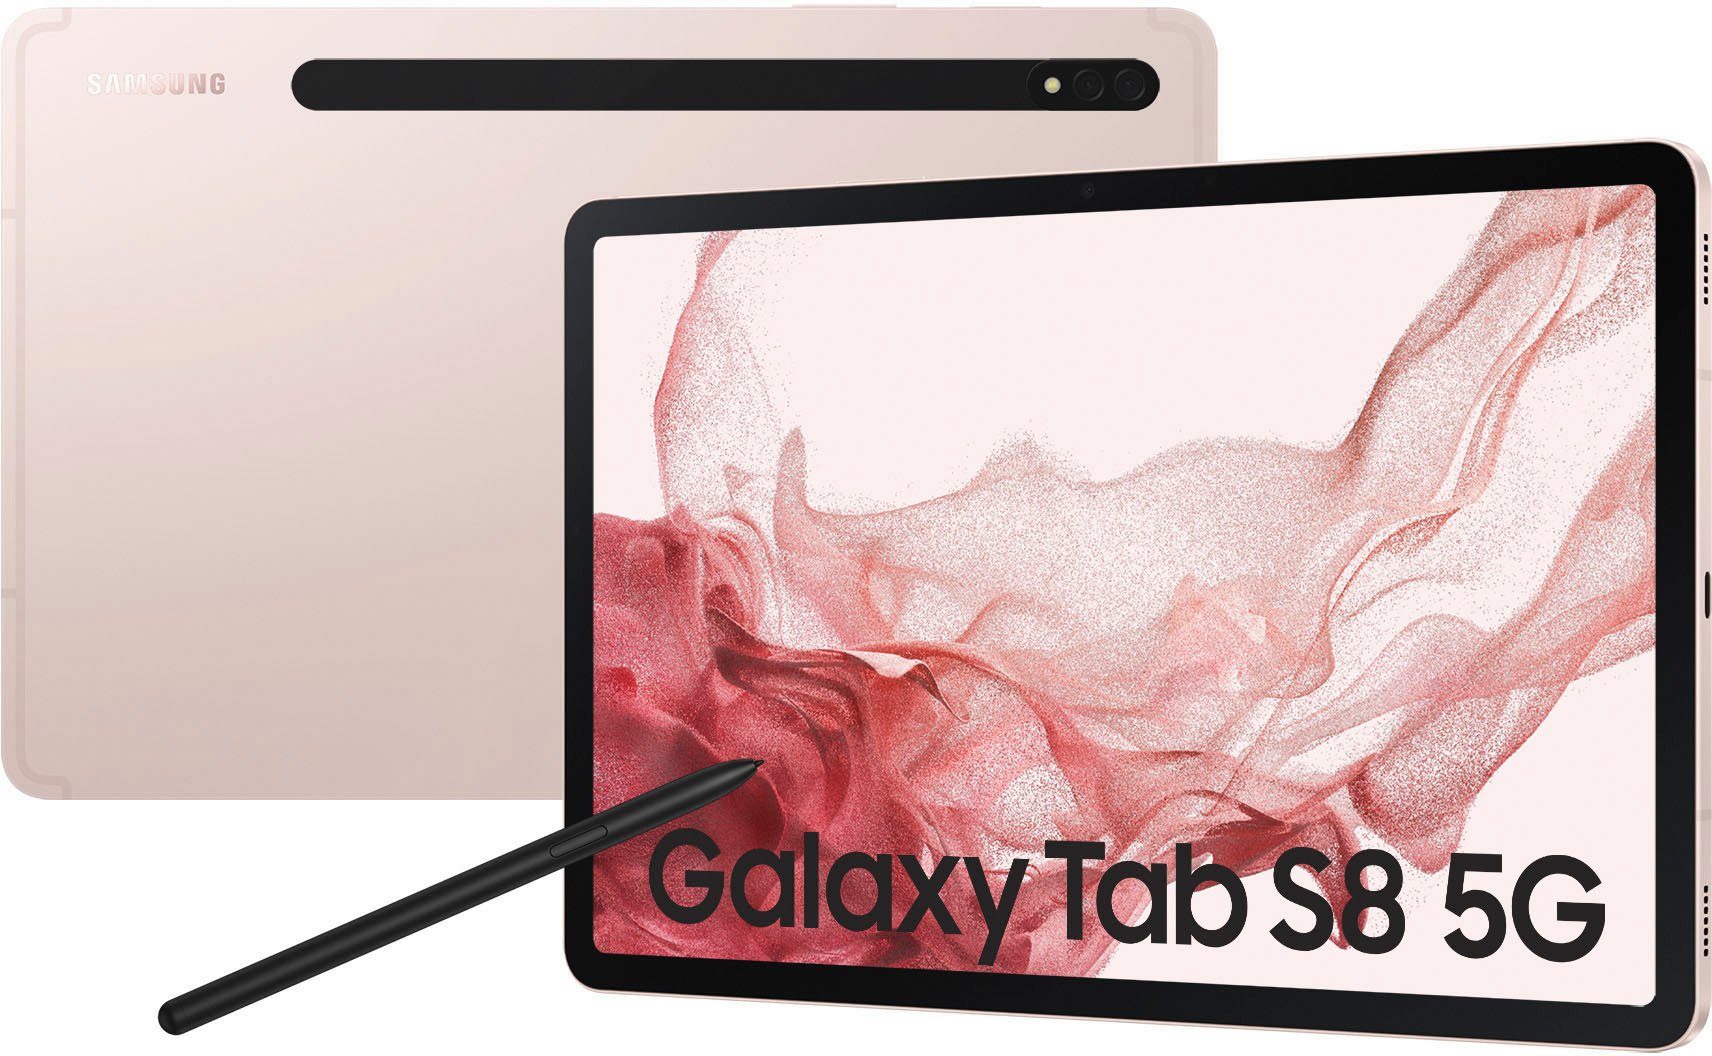 5G Samsung Tab Galaxy 5G) Tablet S8 Android, Pink GB, Gold (11", 128